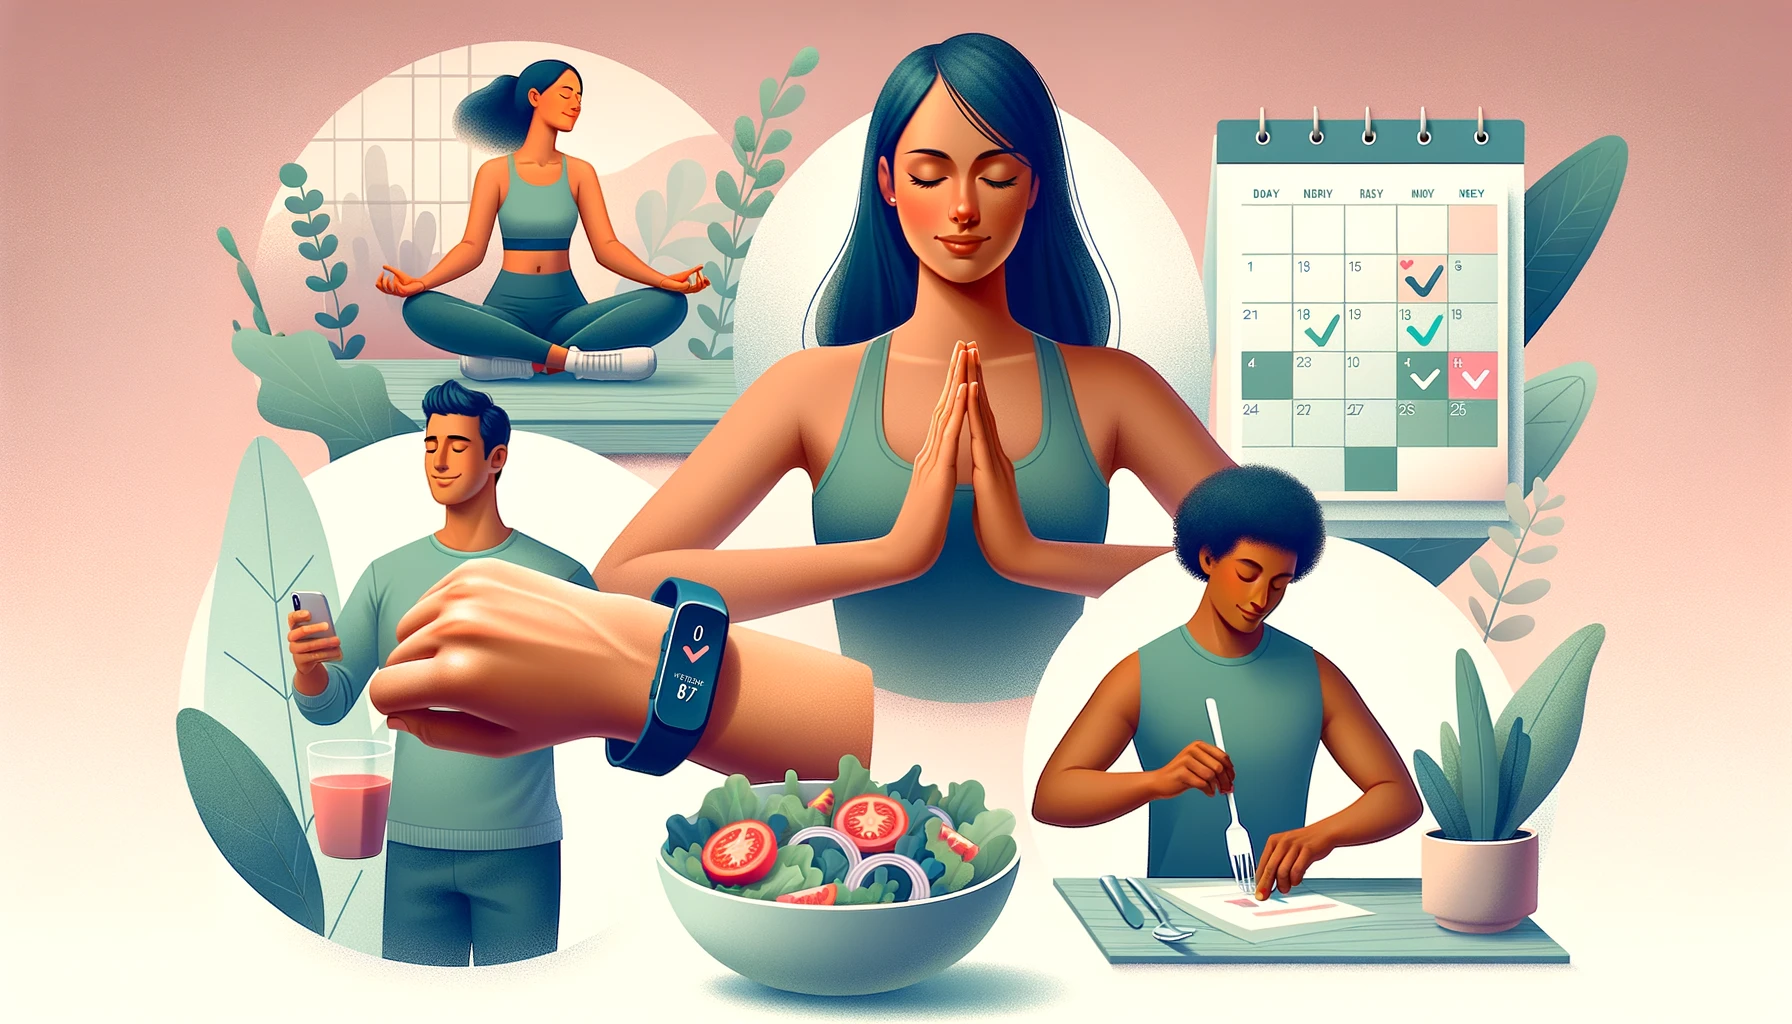 Diverse individuals engaging in wellness routines, from meditation to healthy eating, emphasizing the importance of consistent habits for improved well-being.